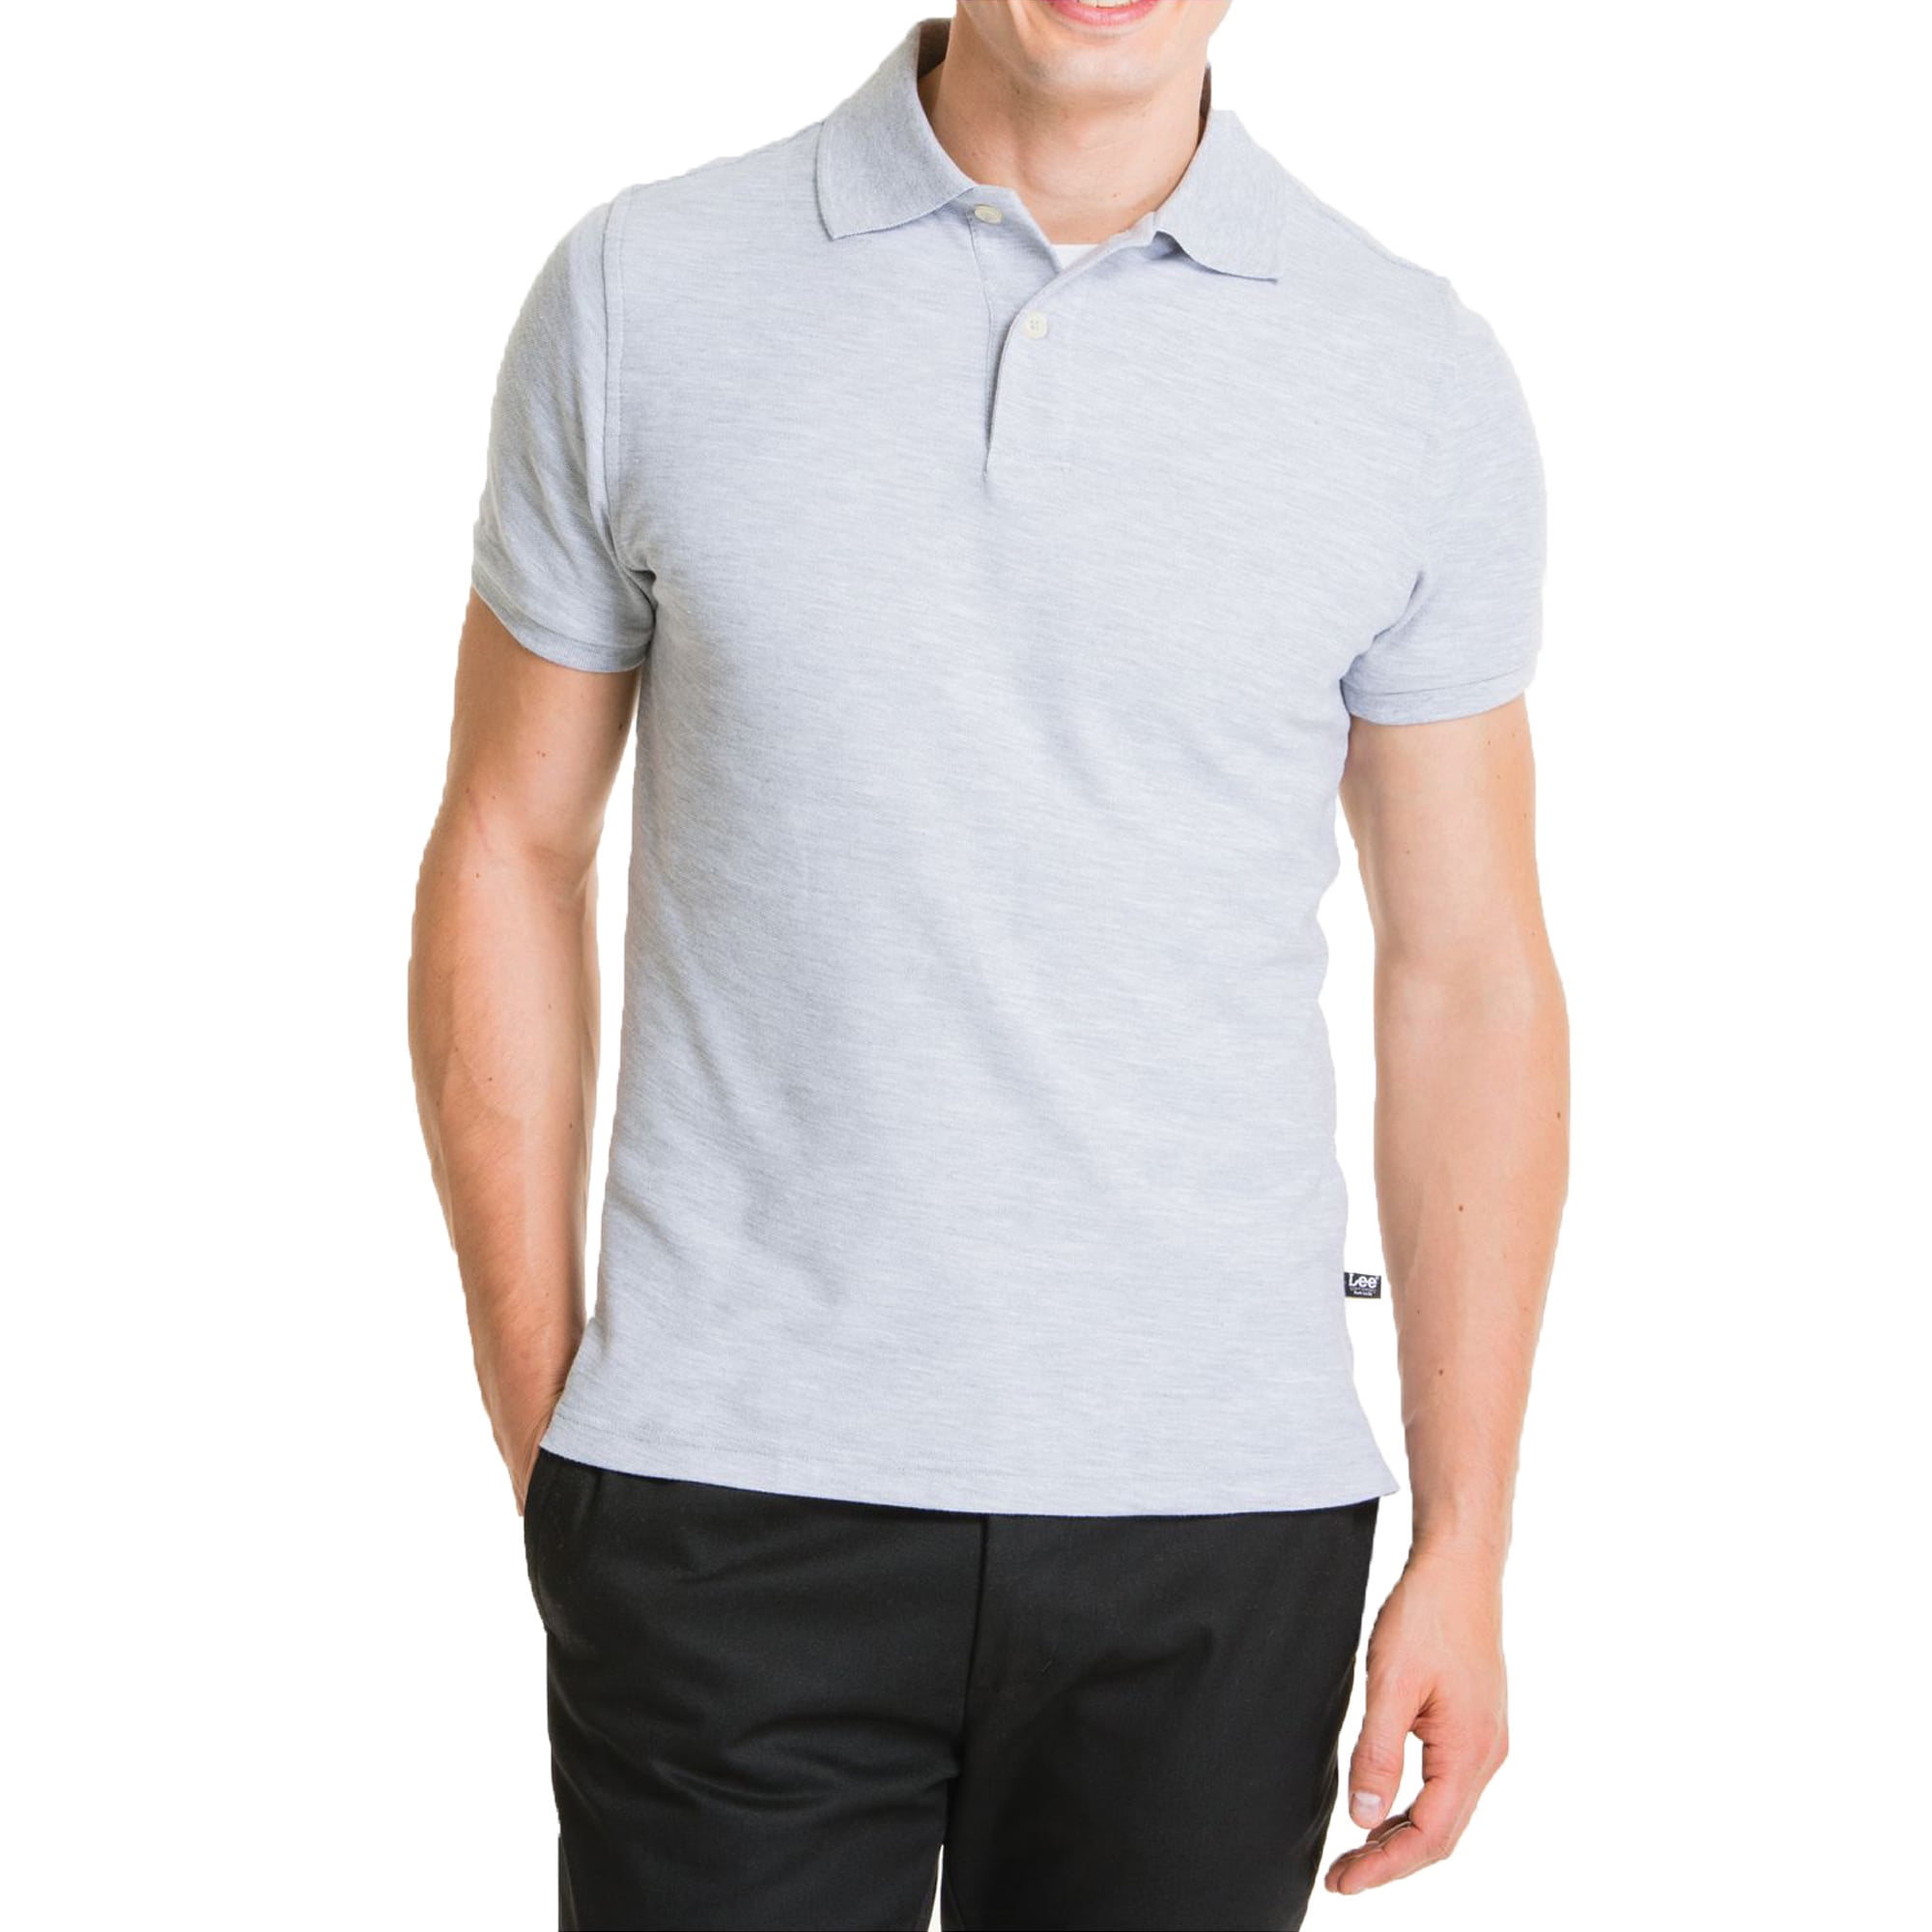 Lee Uniforms Young Modern Fit Short Sleeve Polo - Walmart.com